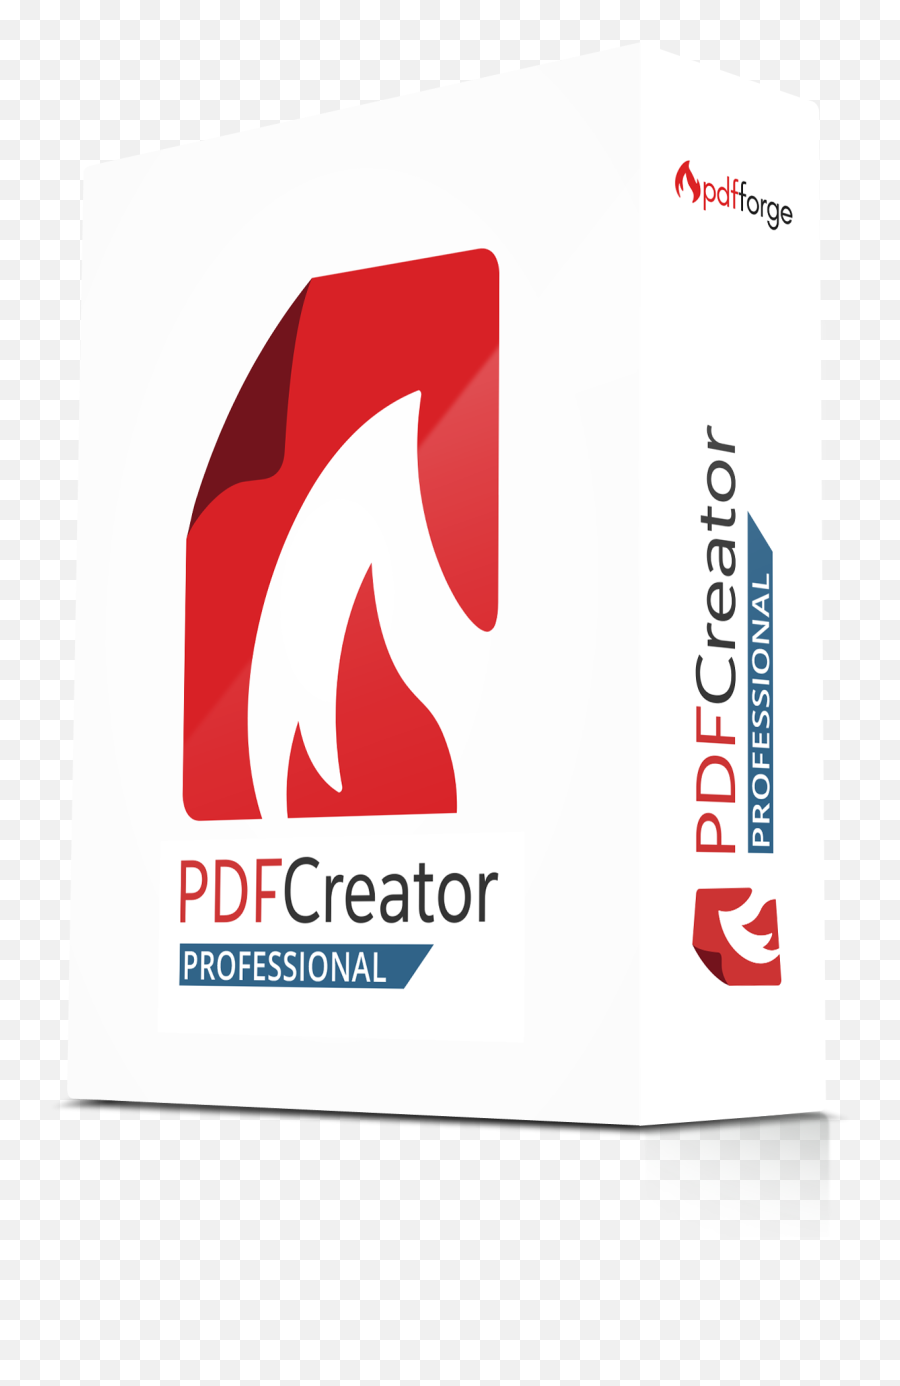 Buy Pdfcreator Professional Here - Pdfforge Emoji,How To Make A Professional Logo